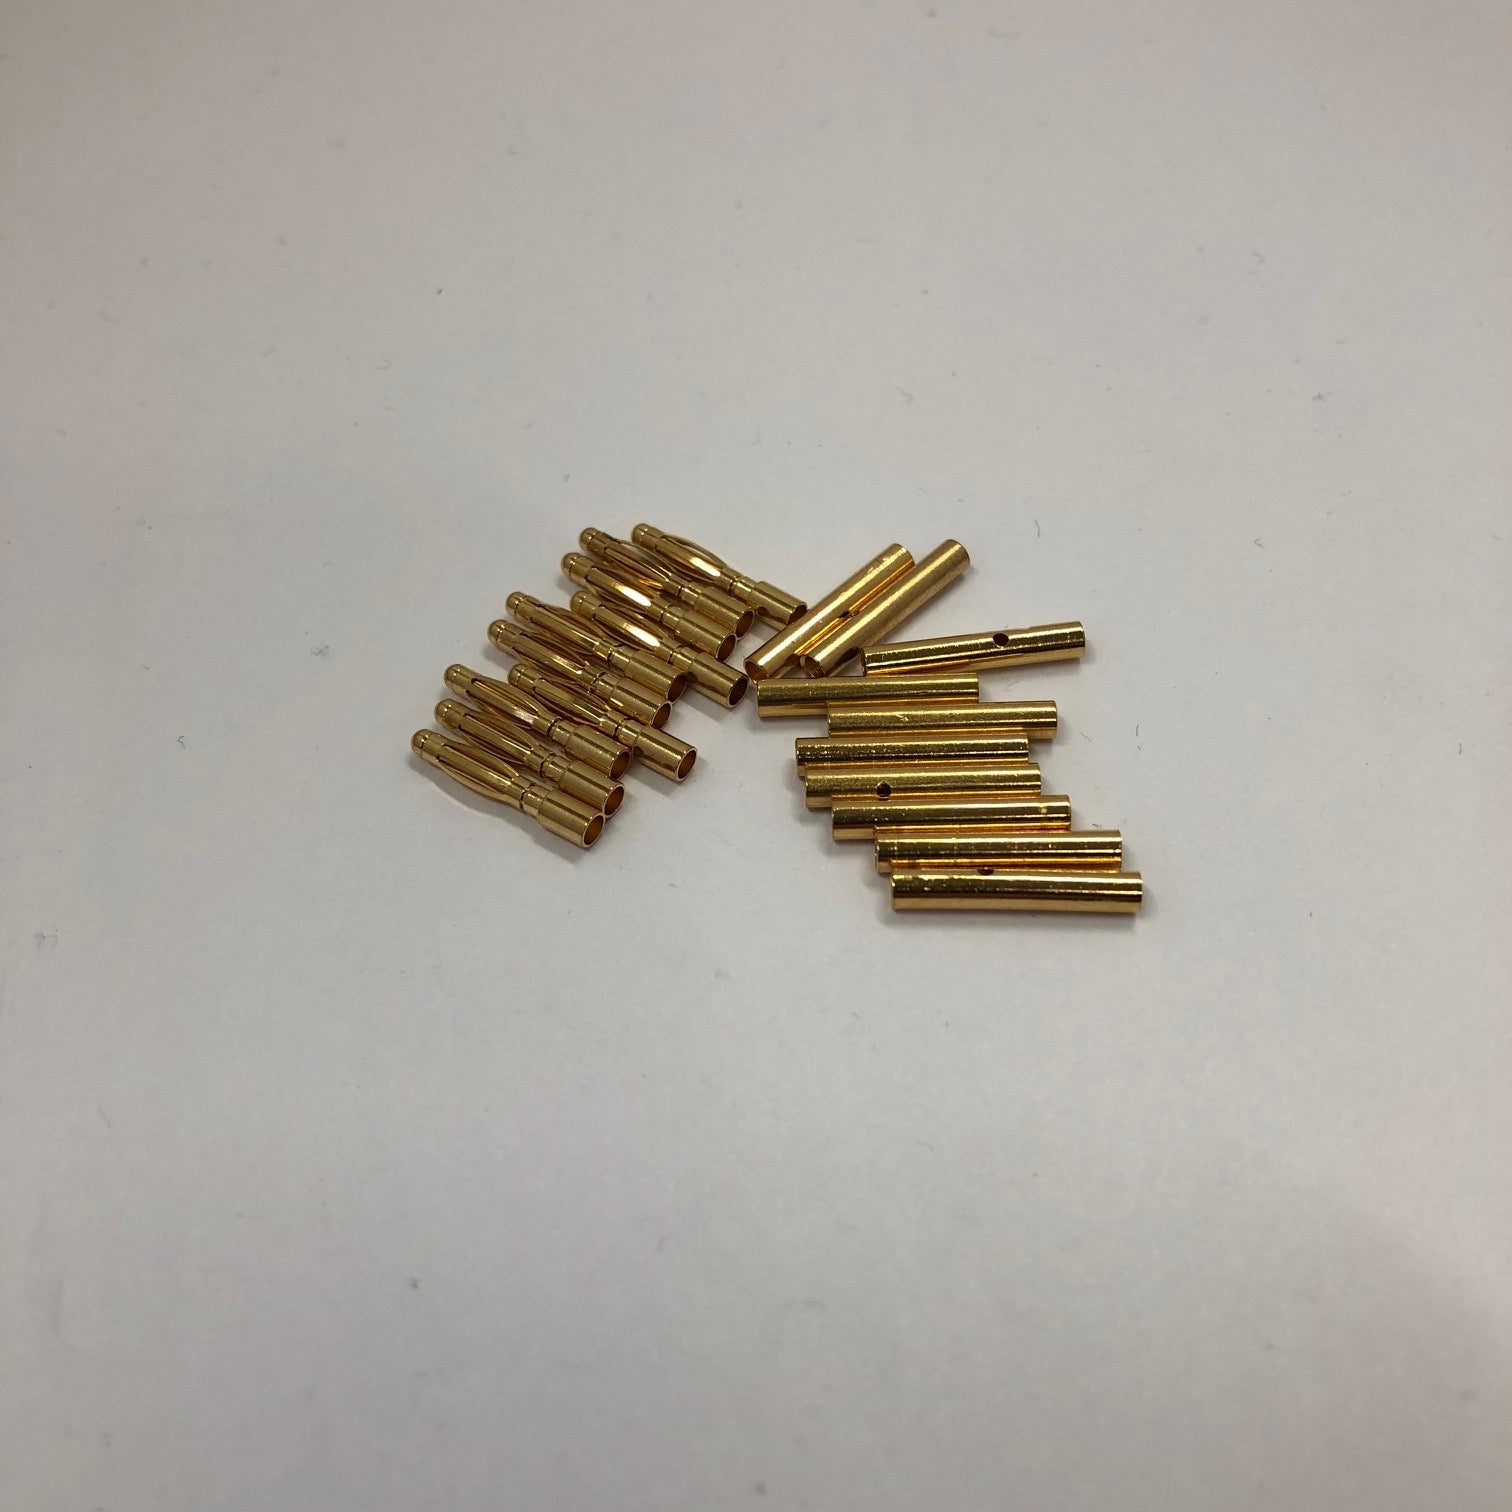 2mm Gold Bullet Connector Set - 10 Pairs